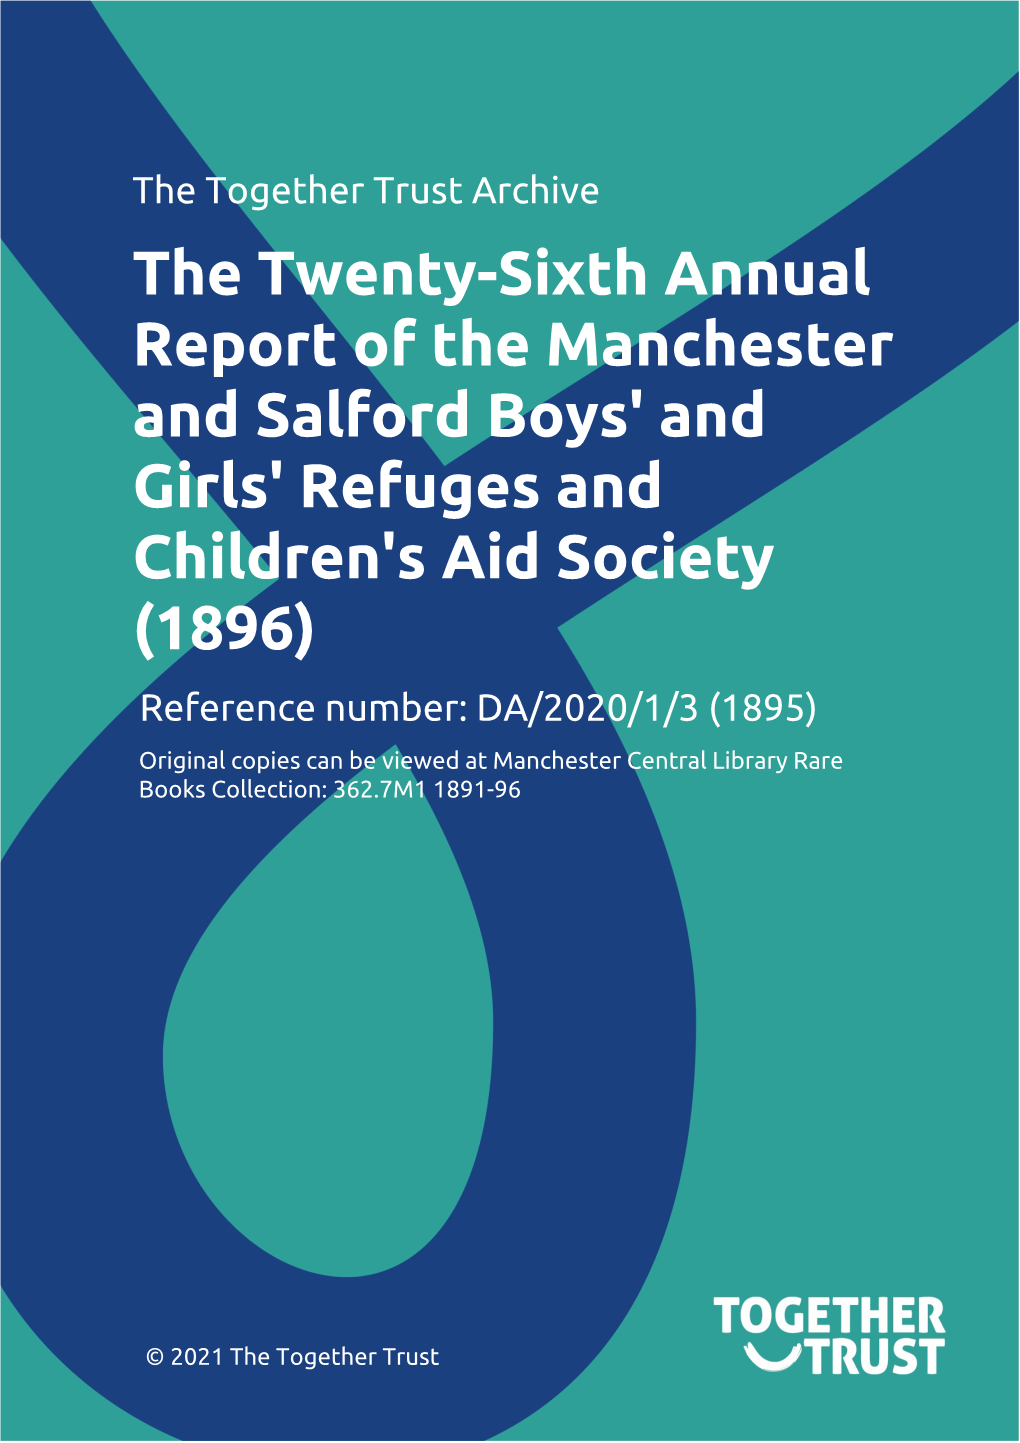 The Twenty-Sixth Annual Report of the Manchester